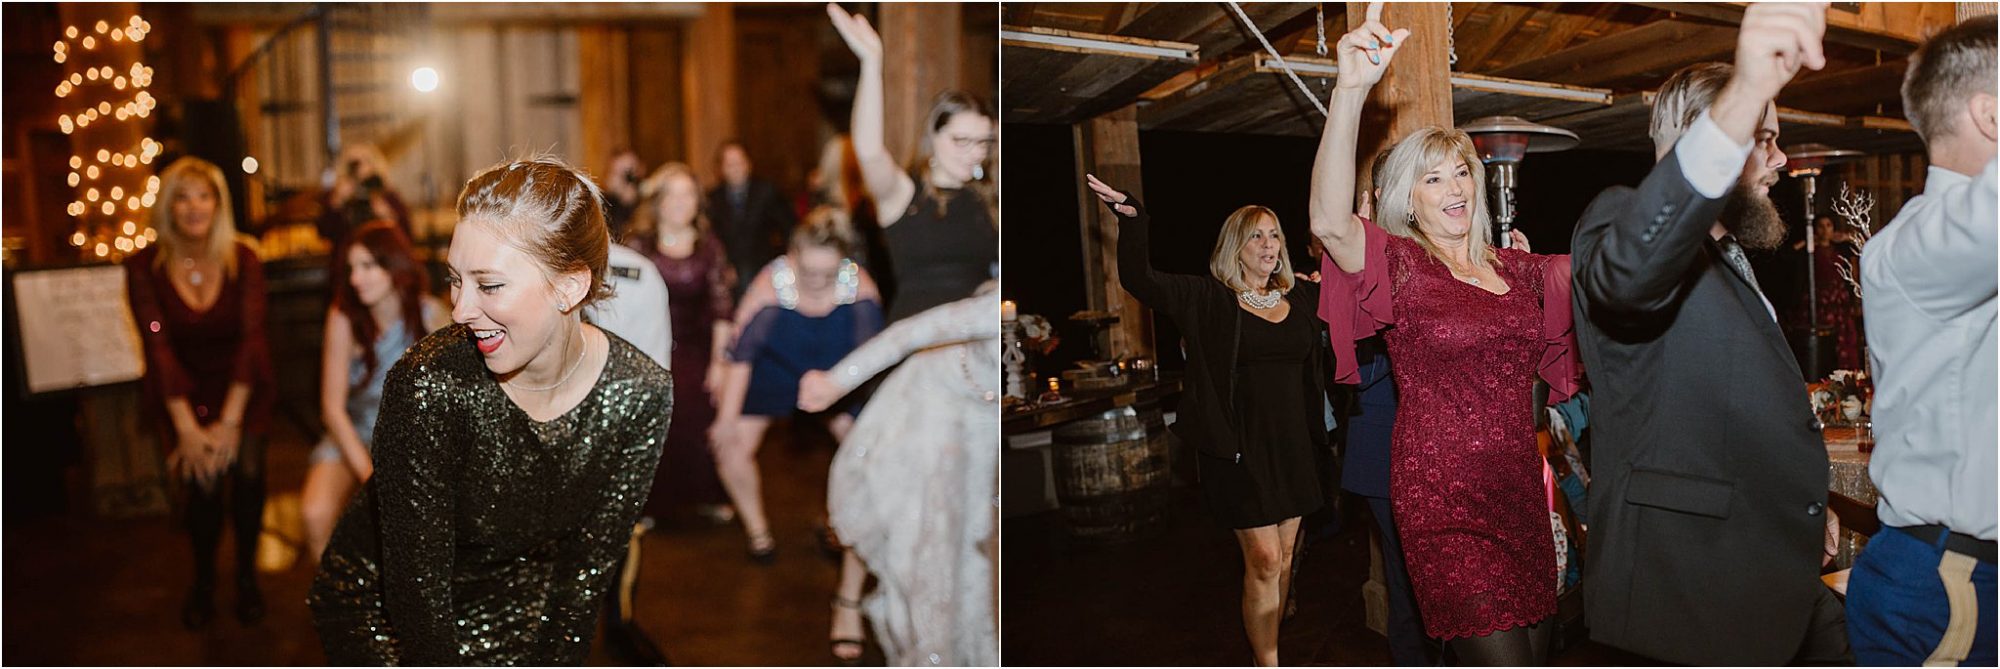 guests dancing at fall wedding in Tennessee